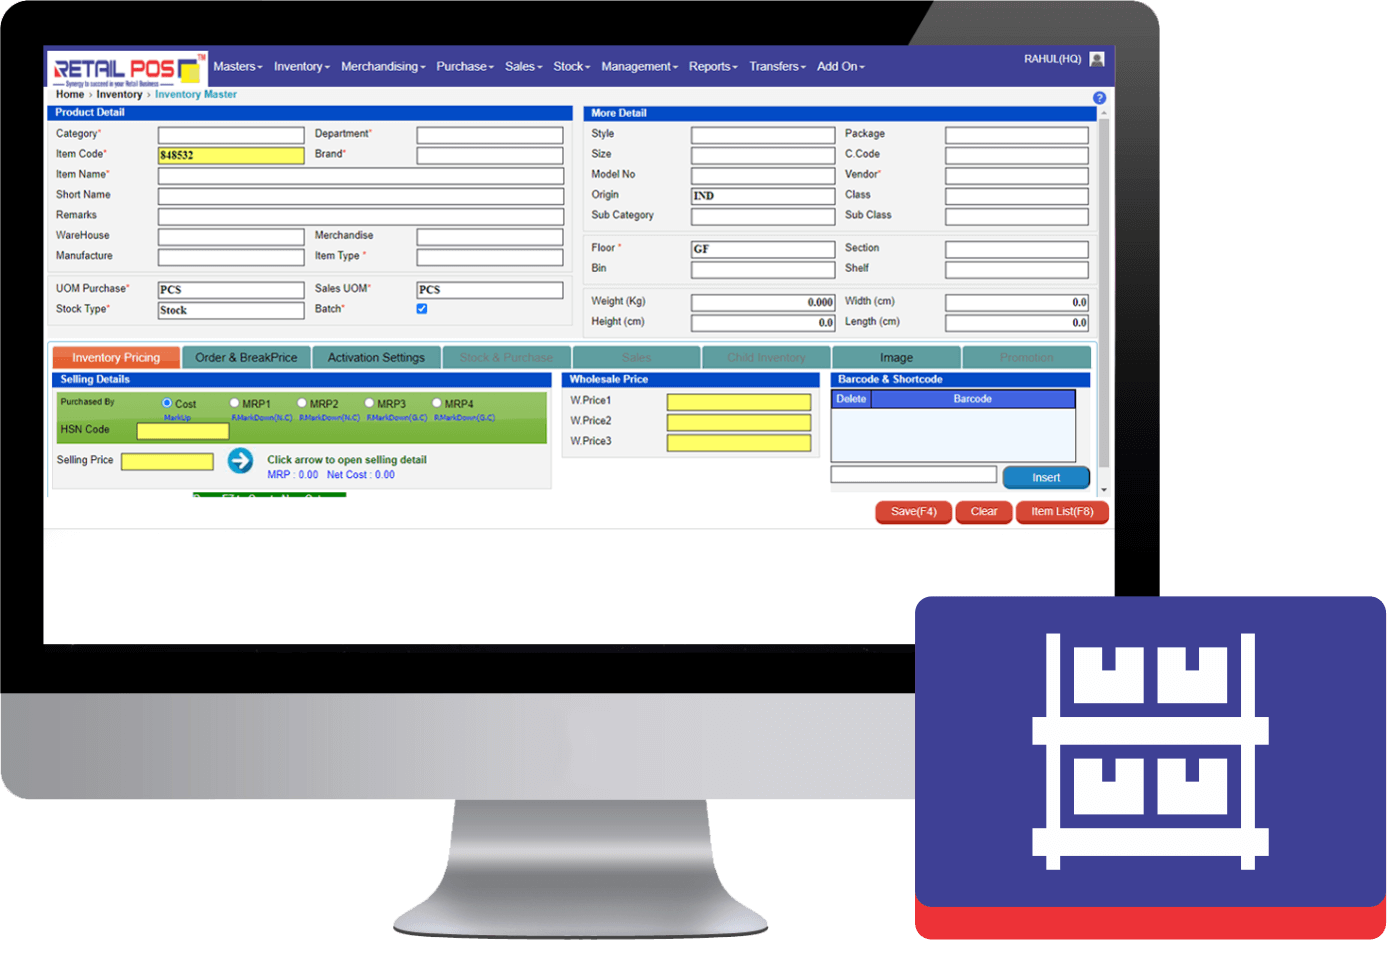 Inventory Management Screen from the Retail POS's Hypermarket Billing Software